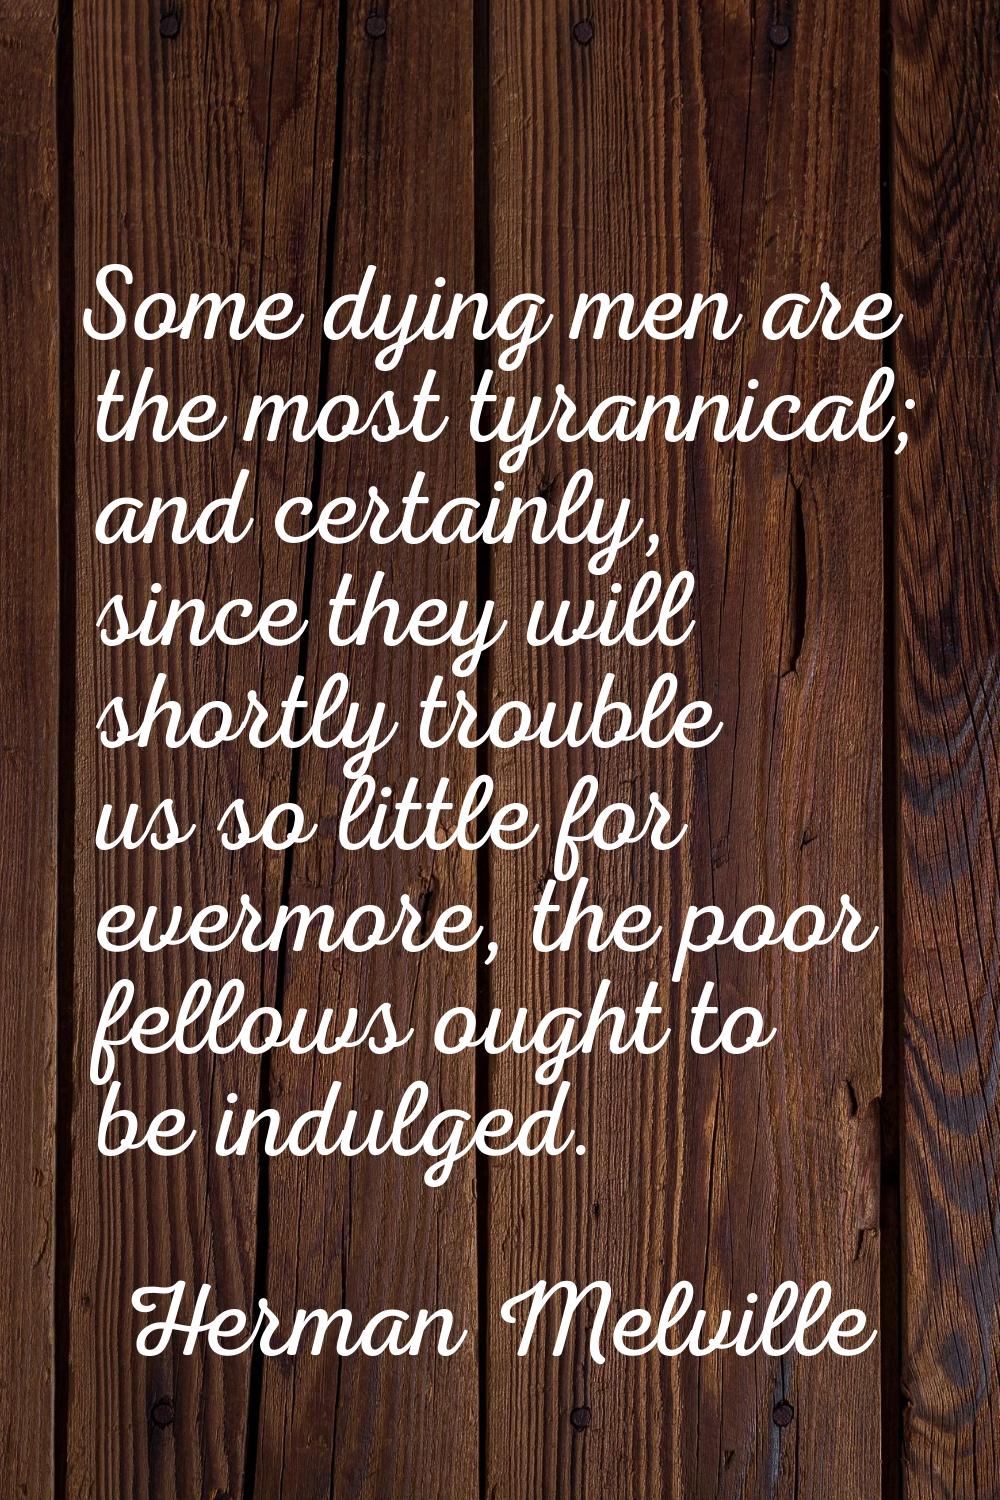 Some dying men are the most tyrannical; and certainly, since they will shortly trouble us so little